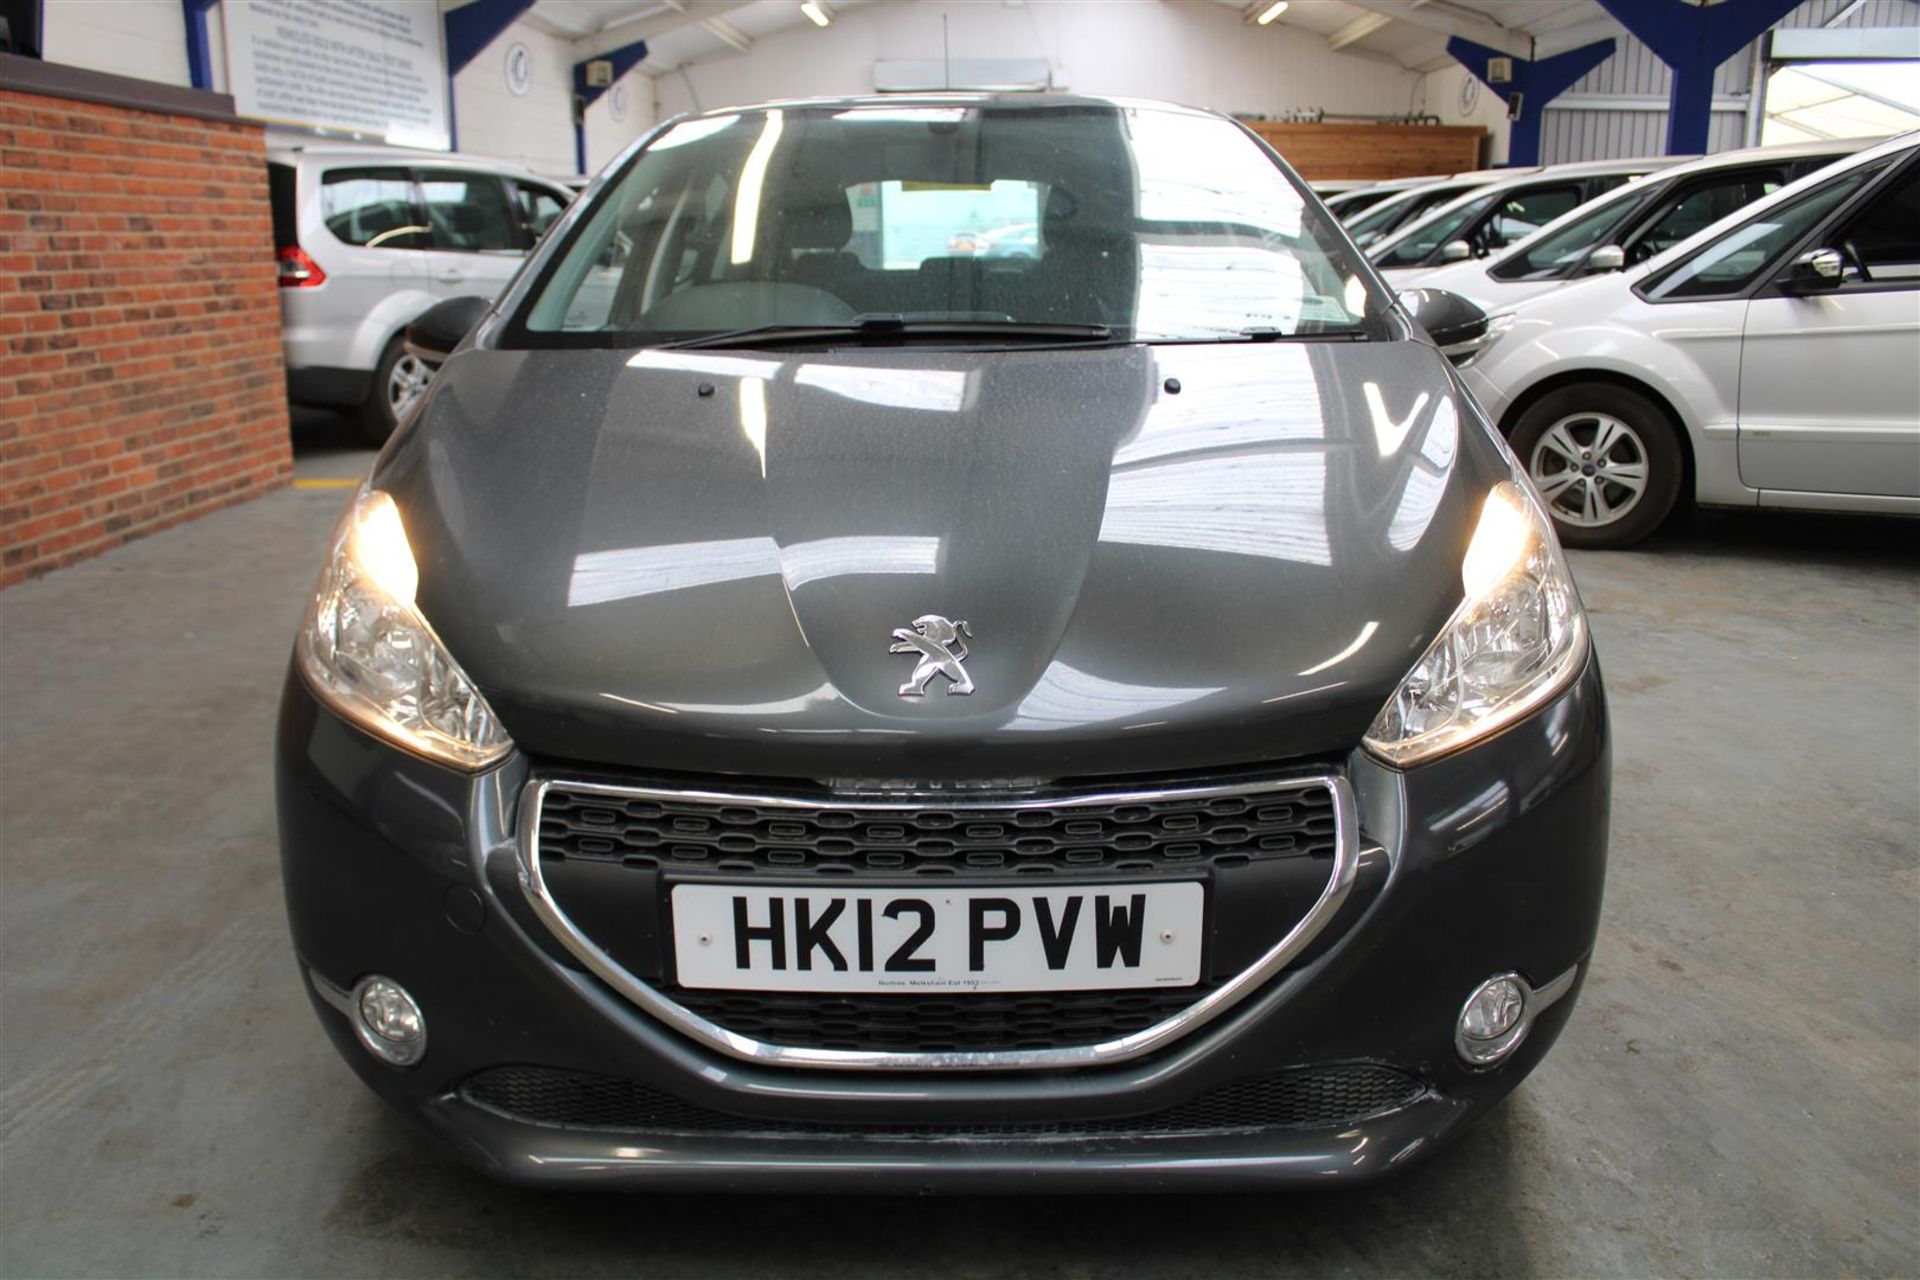 12 12 Peugeot 208 Active - Image 2 of 37